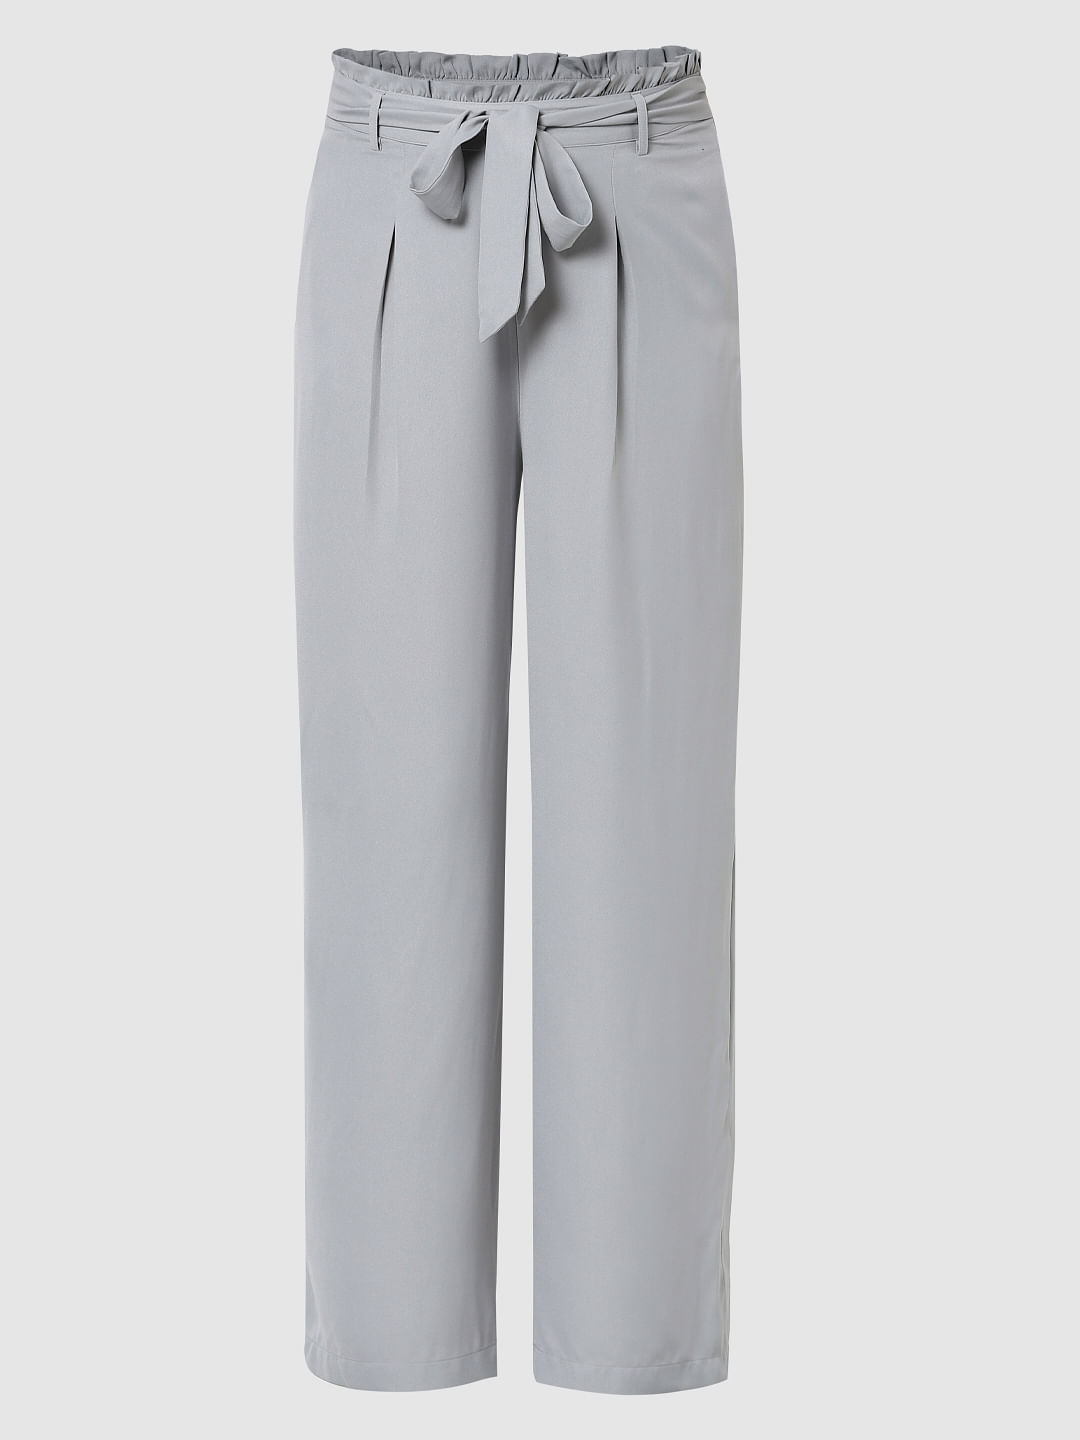 Buy GO COLORS Women Grey Stripes Cotton Wide Pants at Amazon.in